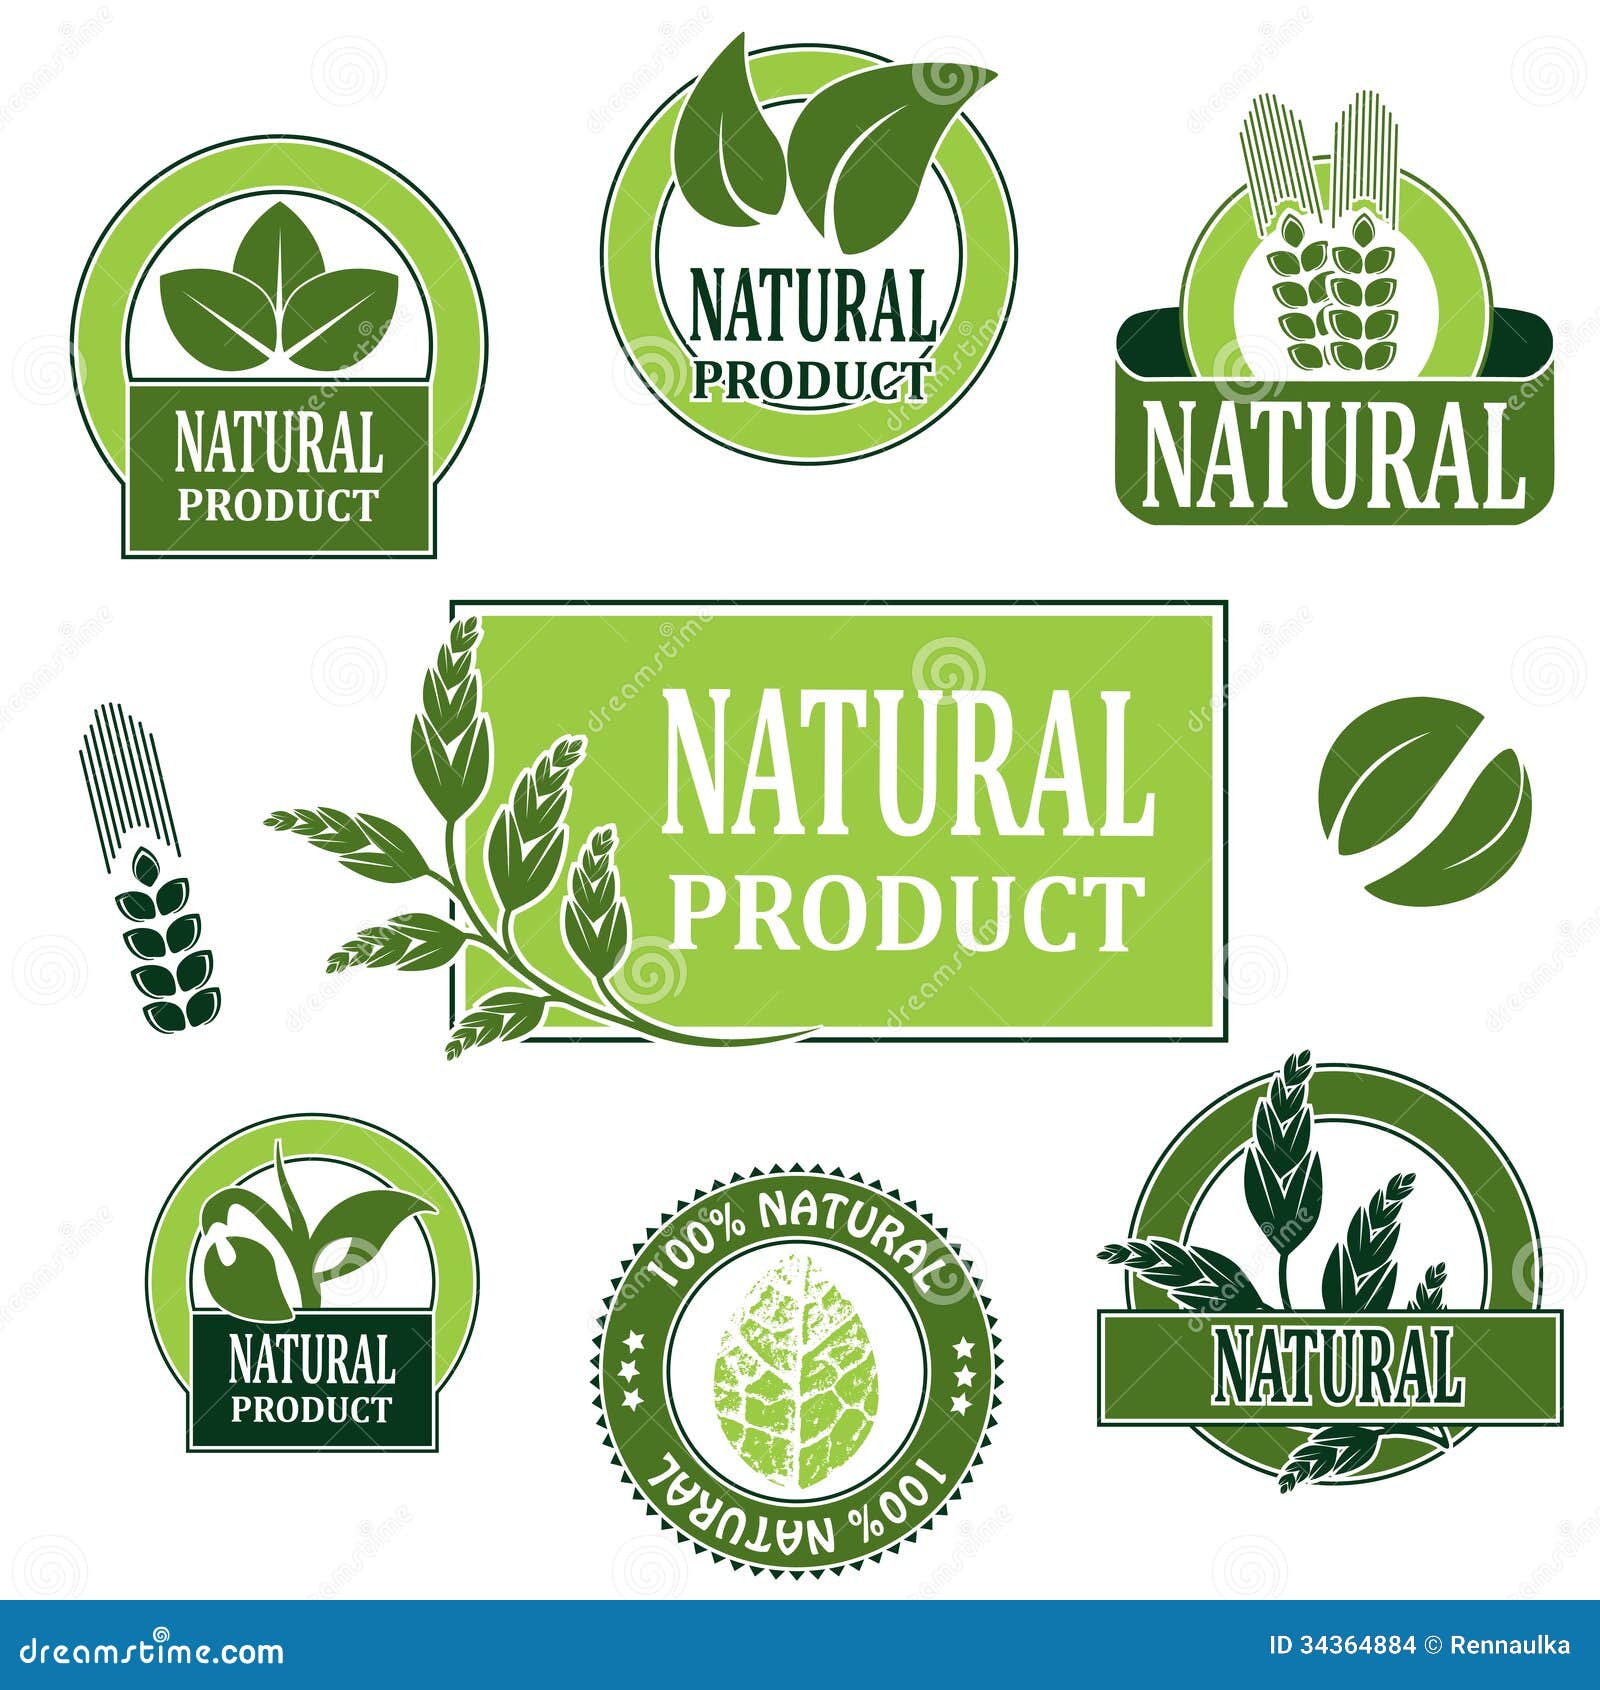 Nature Symbols For Natural Product Stock Images - Image ...